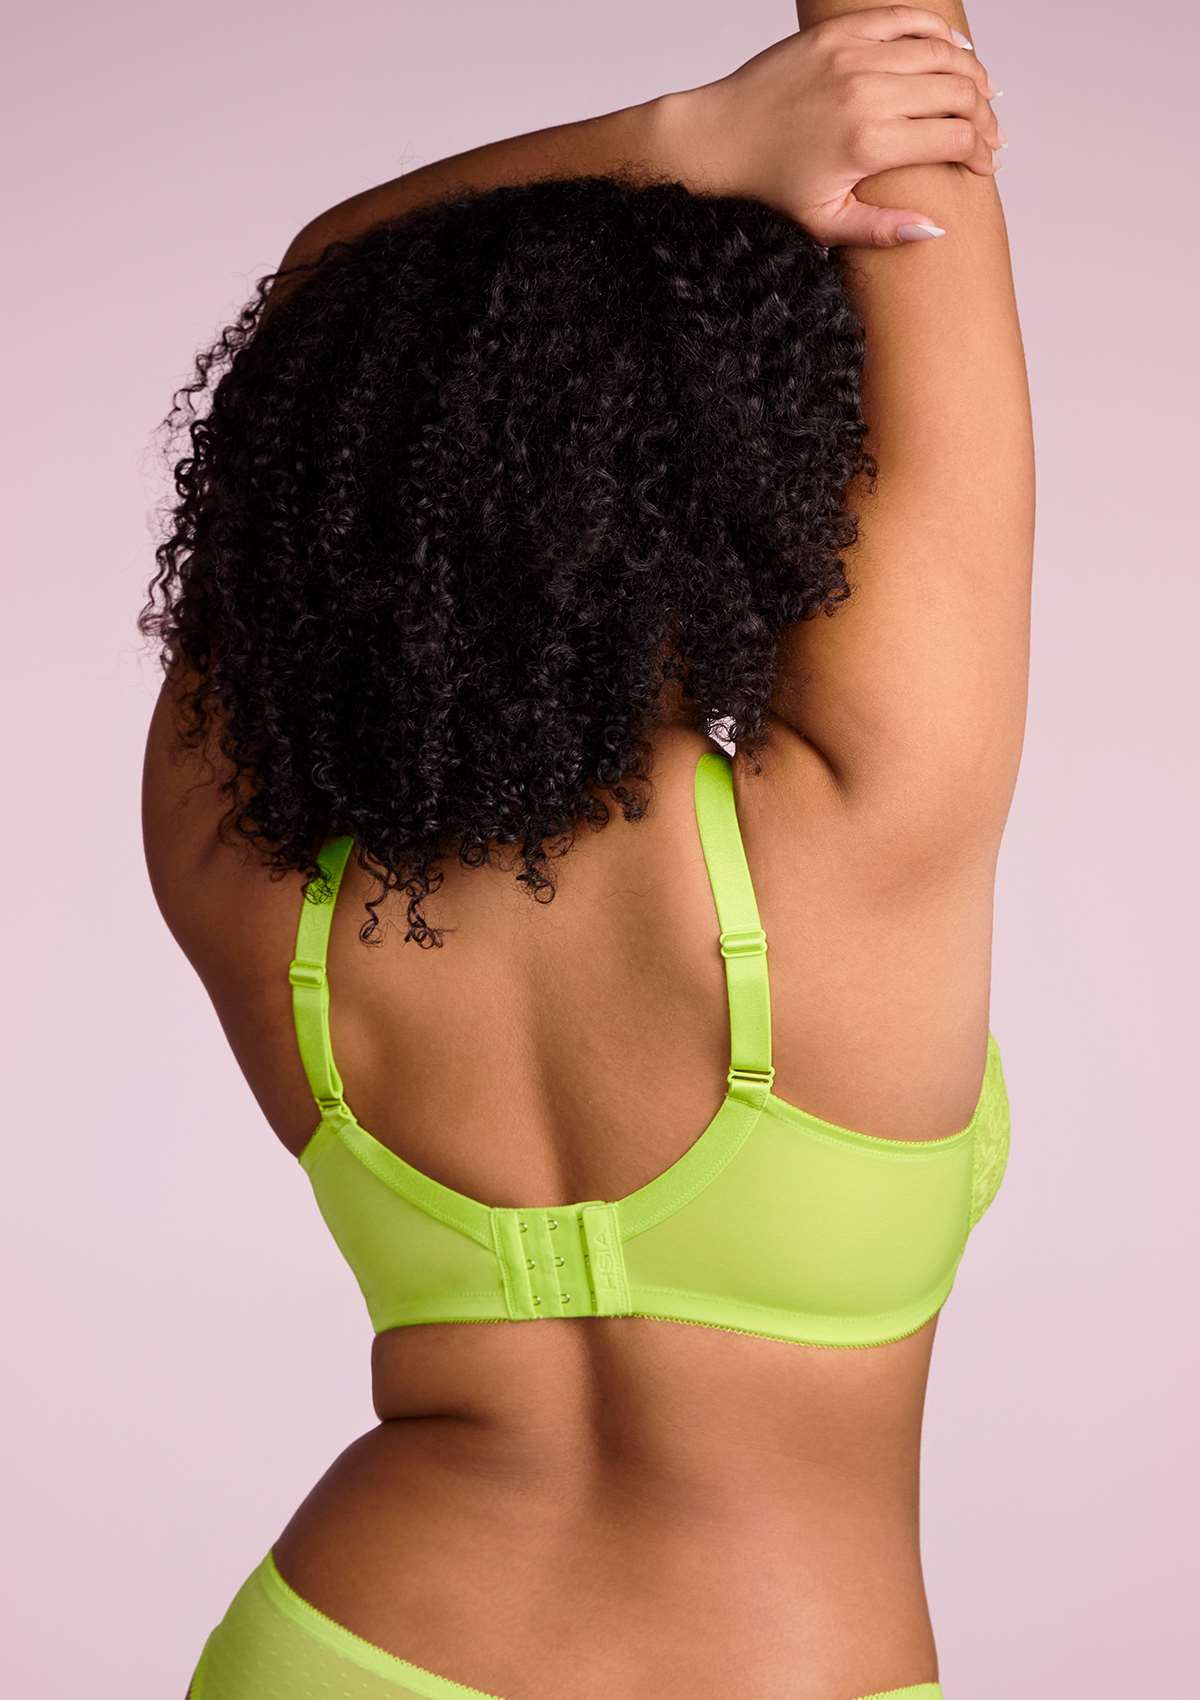 HSIA Enchante Full Cup Minimizing Bra: Supportive Unlined Lace Bra - Lime Green / 44 / C